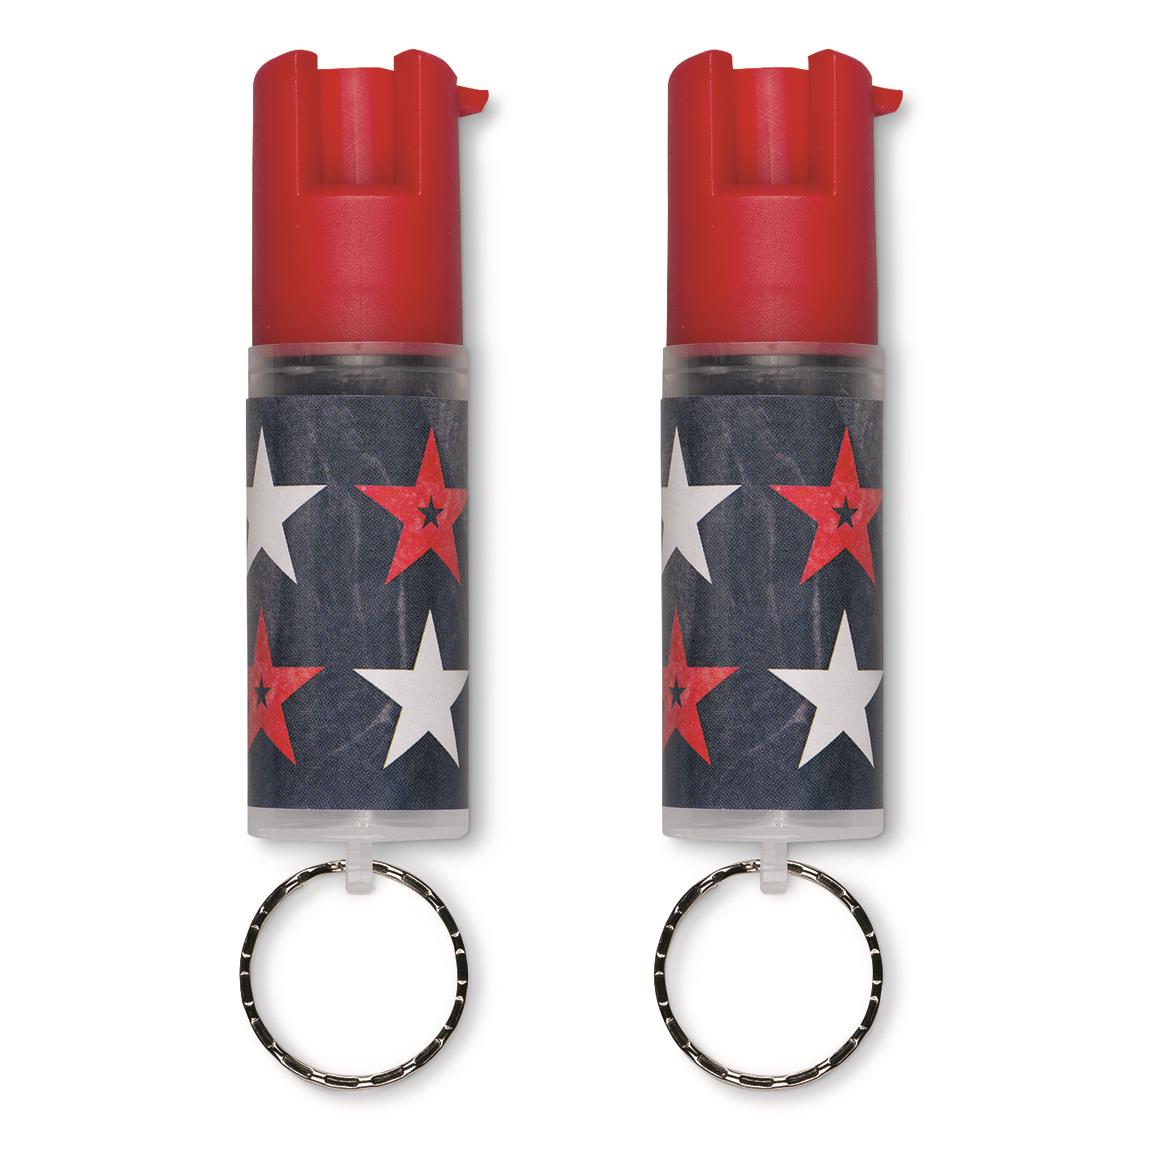 Sabre Red Pepper Spray with Key Ring, 2 Pack